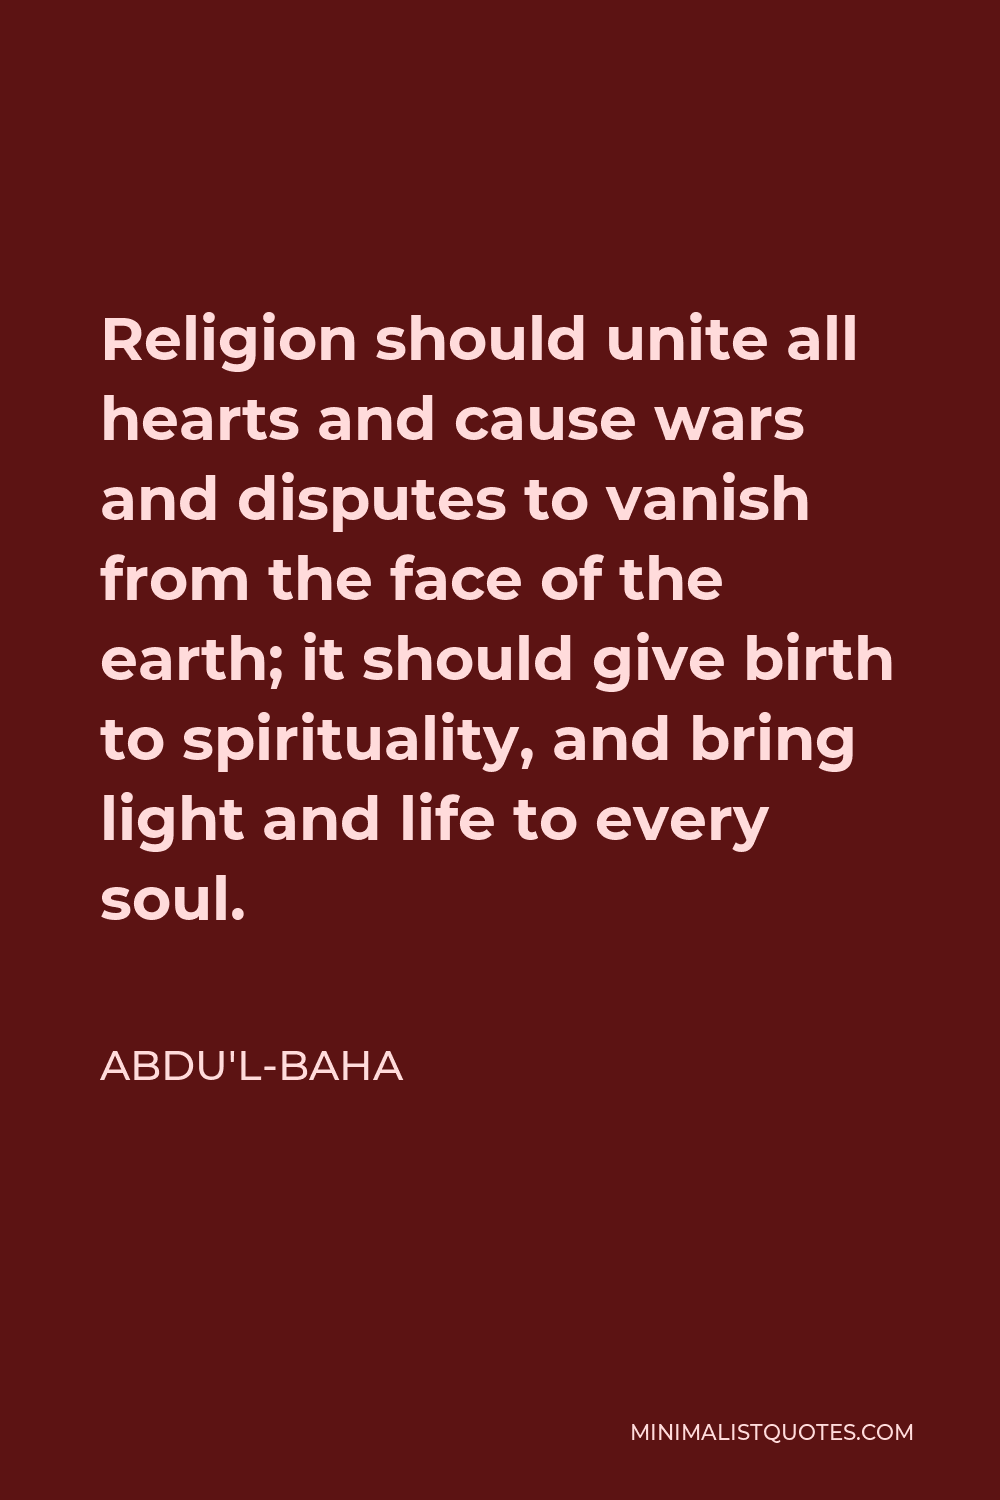 Abdu'l-Baha Quote - Religion should unite all hearts and cause wars and disputes to vanish from the face of the earth; it should give birth to spirituality, and bring light and life to every soul.